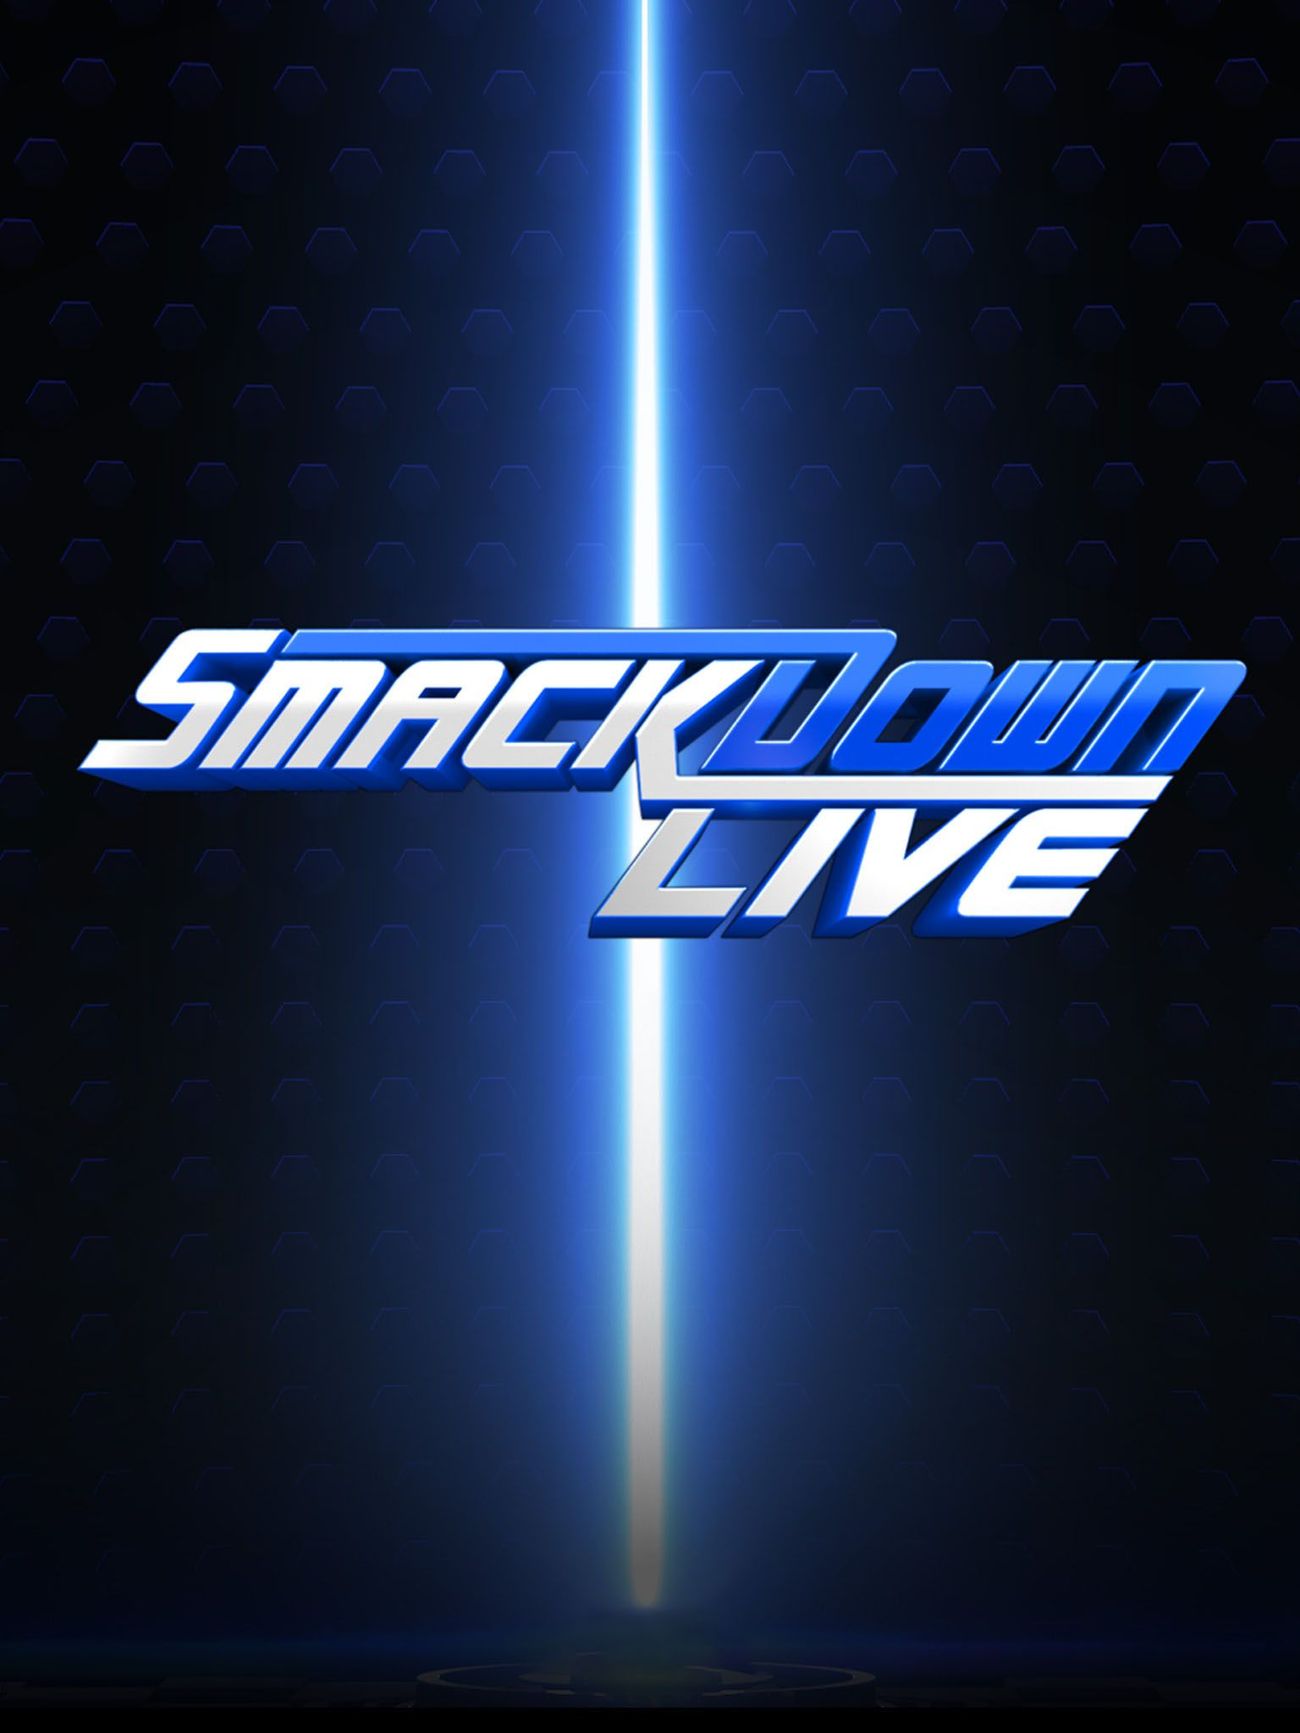 WWE Friday Night SmackDown 15th January (2021) HDTV EngLish 720p [ 700MB ] || 480p [ 350MB ] download